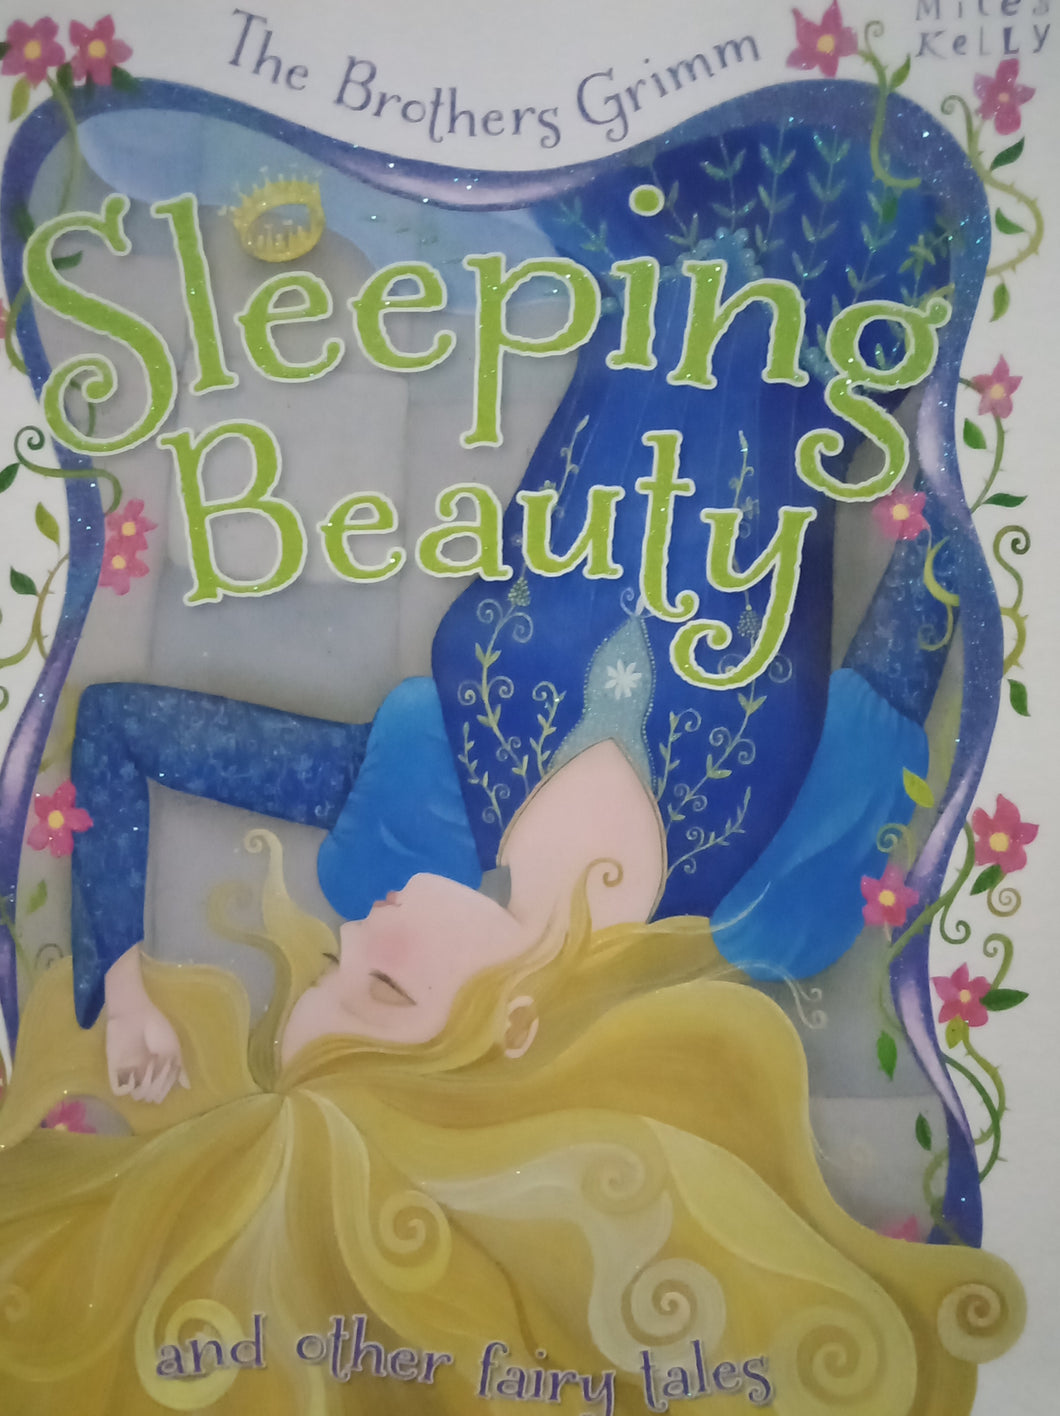 Sleeping Beauty And Other Fairy Tales by Miles Kelly